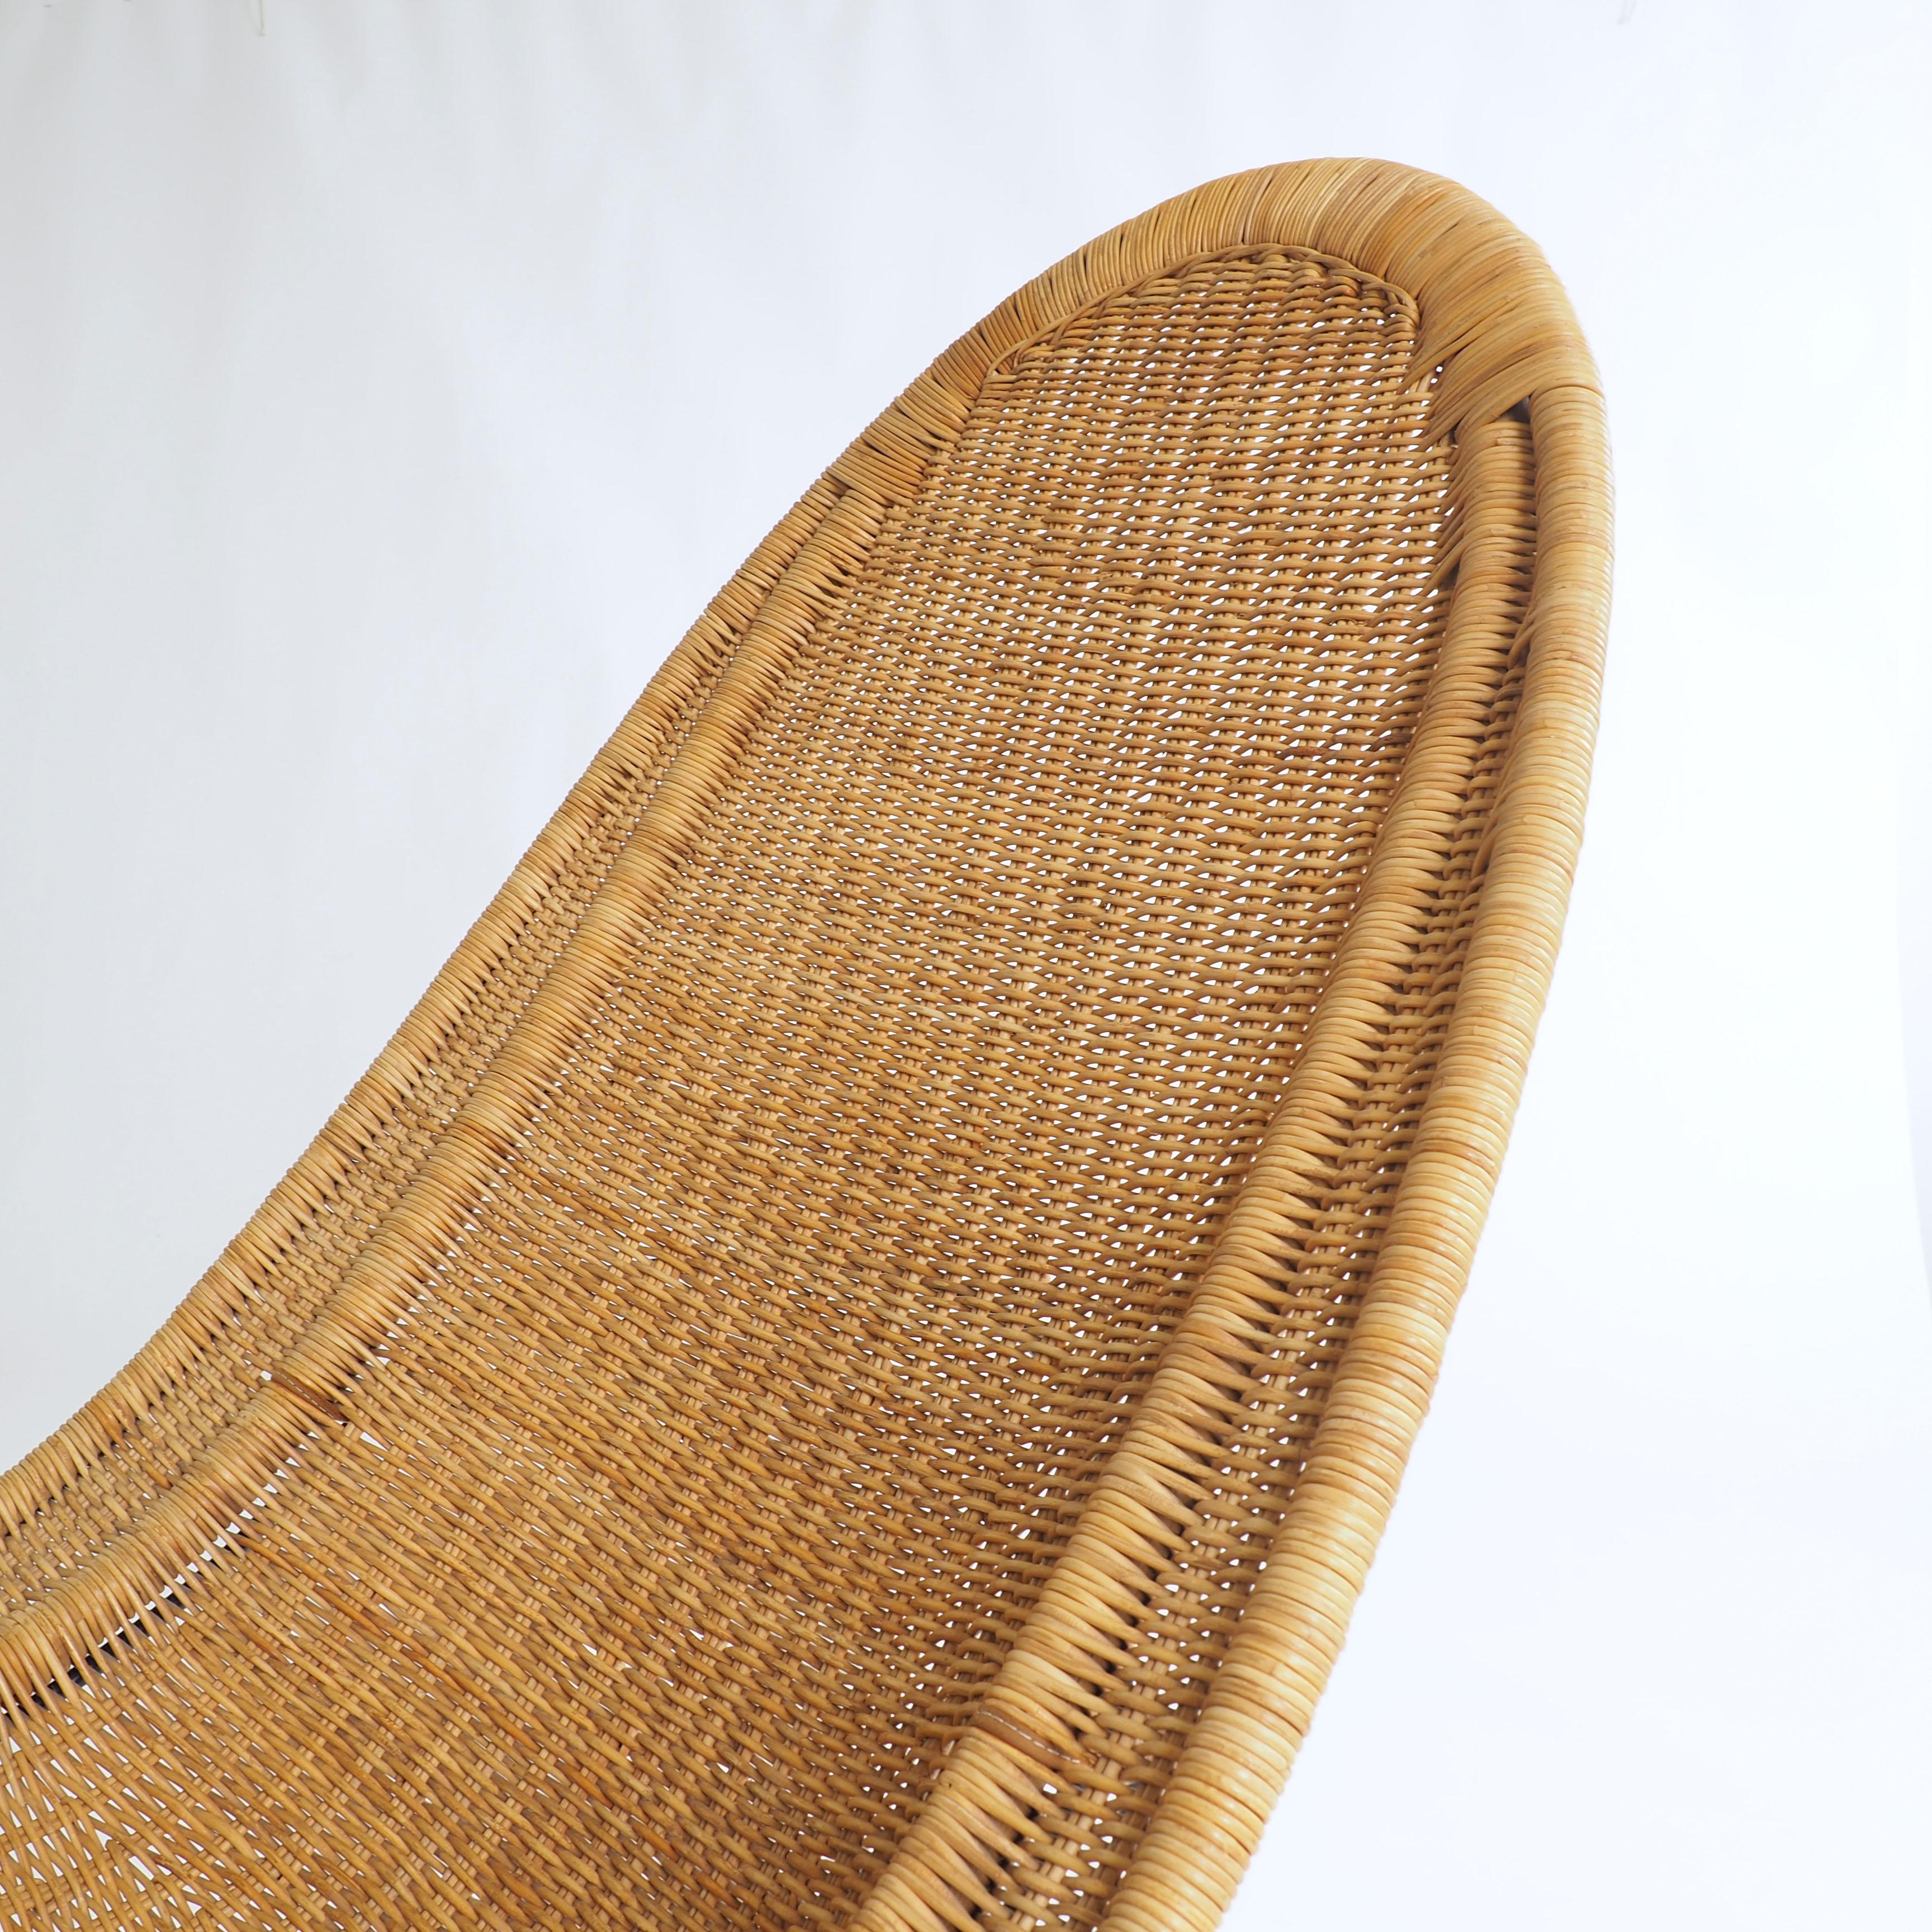 Kerstin Hörlin-Holmqvist designed this lounge chair in rattan and painted metal for the warehouse Nordiska Kompaniet in 1952. She was at that time the most wellknown female furniture designer in Sweden.